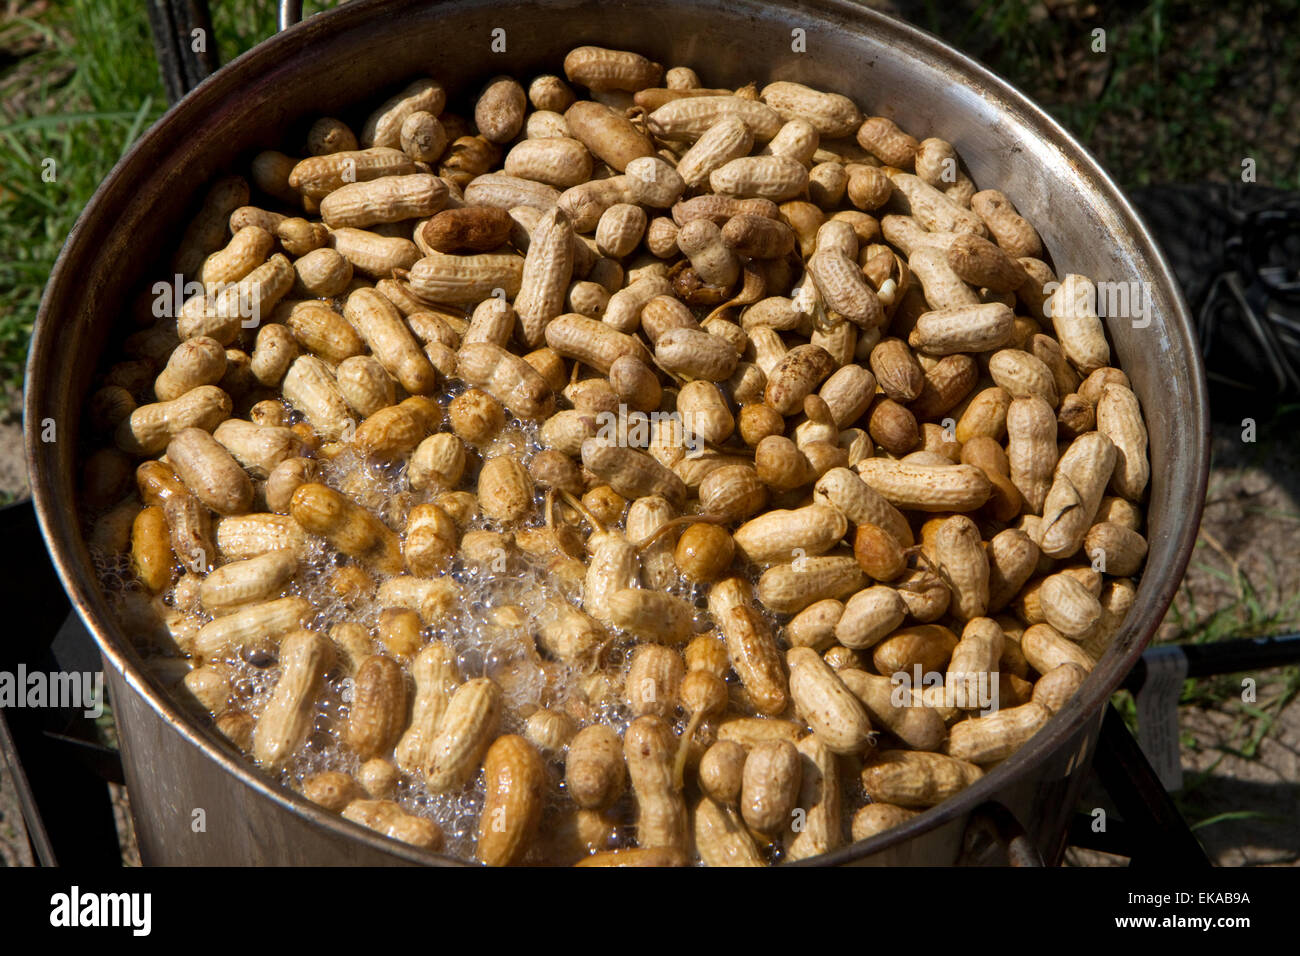 Peanuts boiling in a pot at a produce stand in rural Georgia, USA. Stock Photo